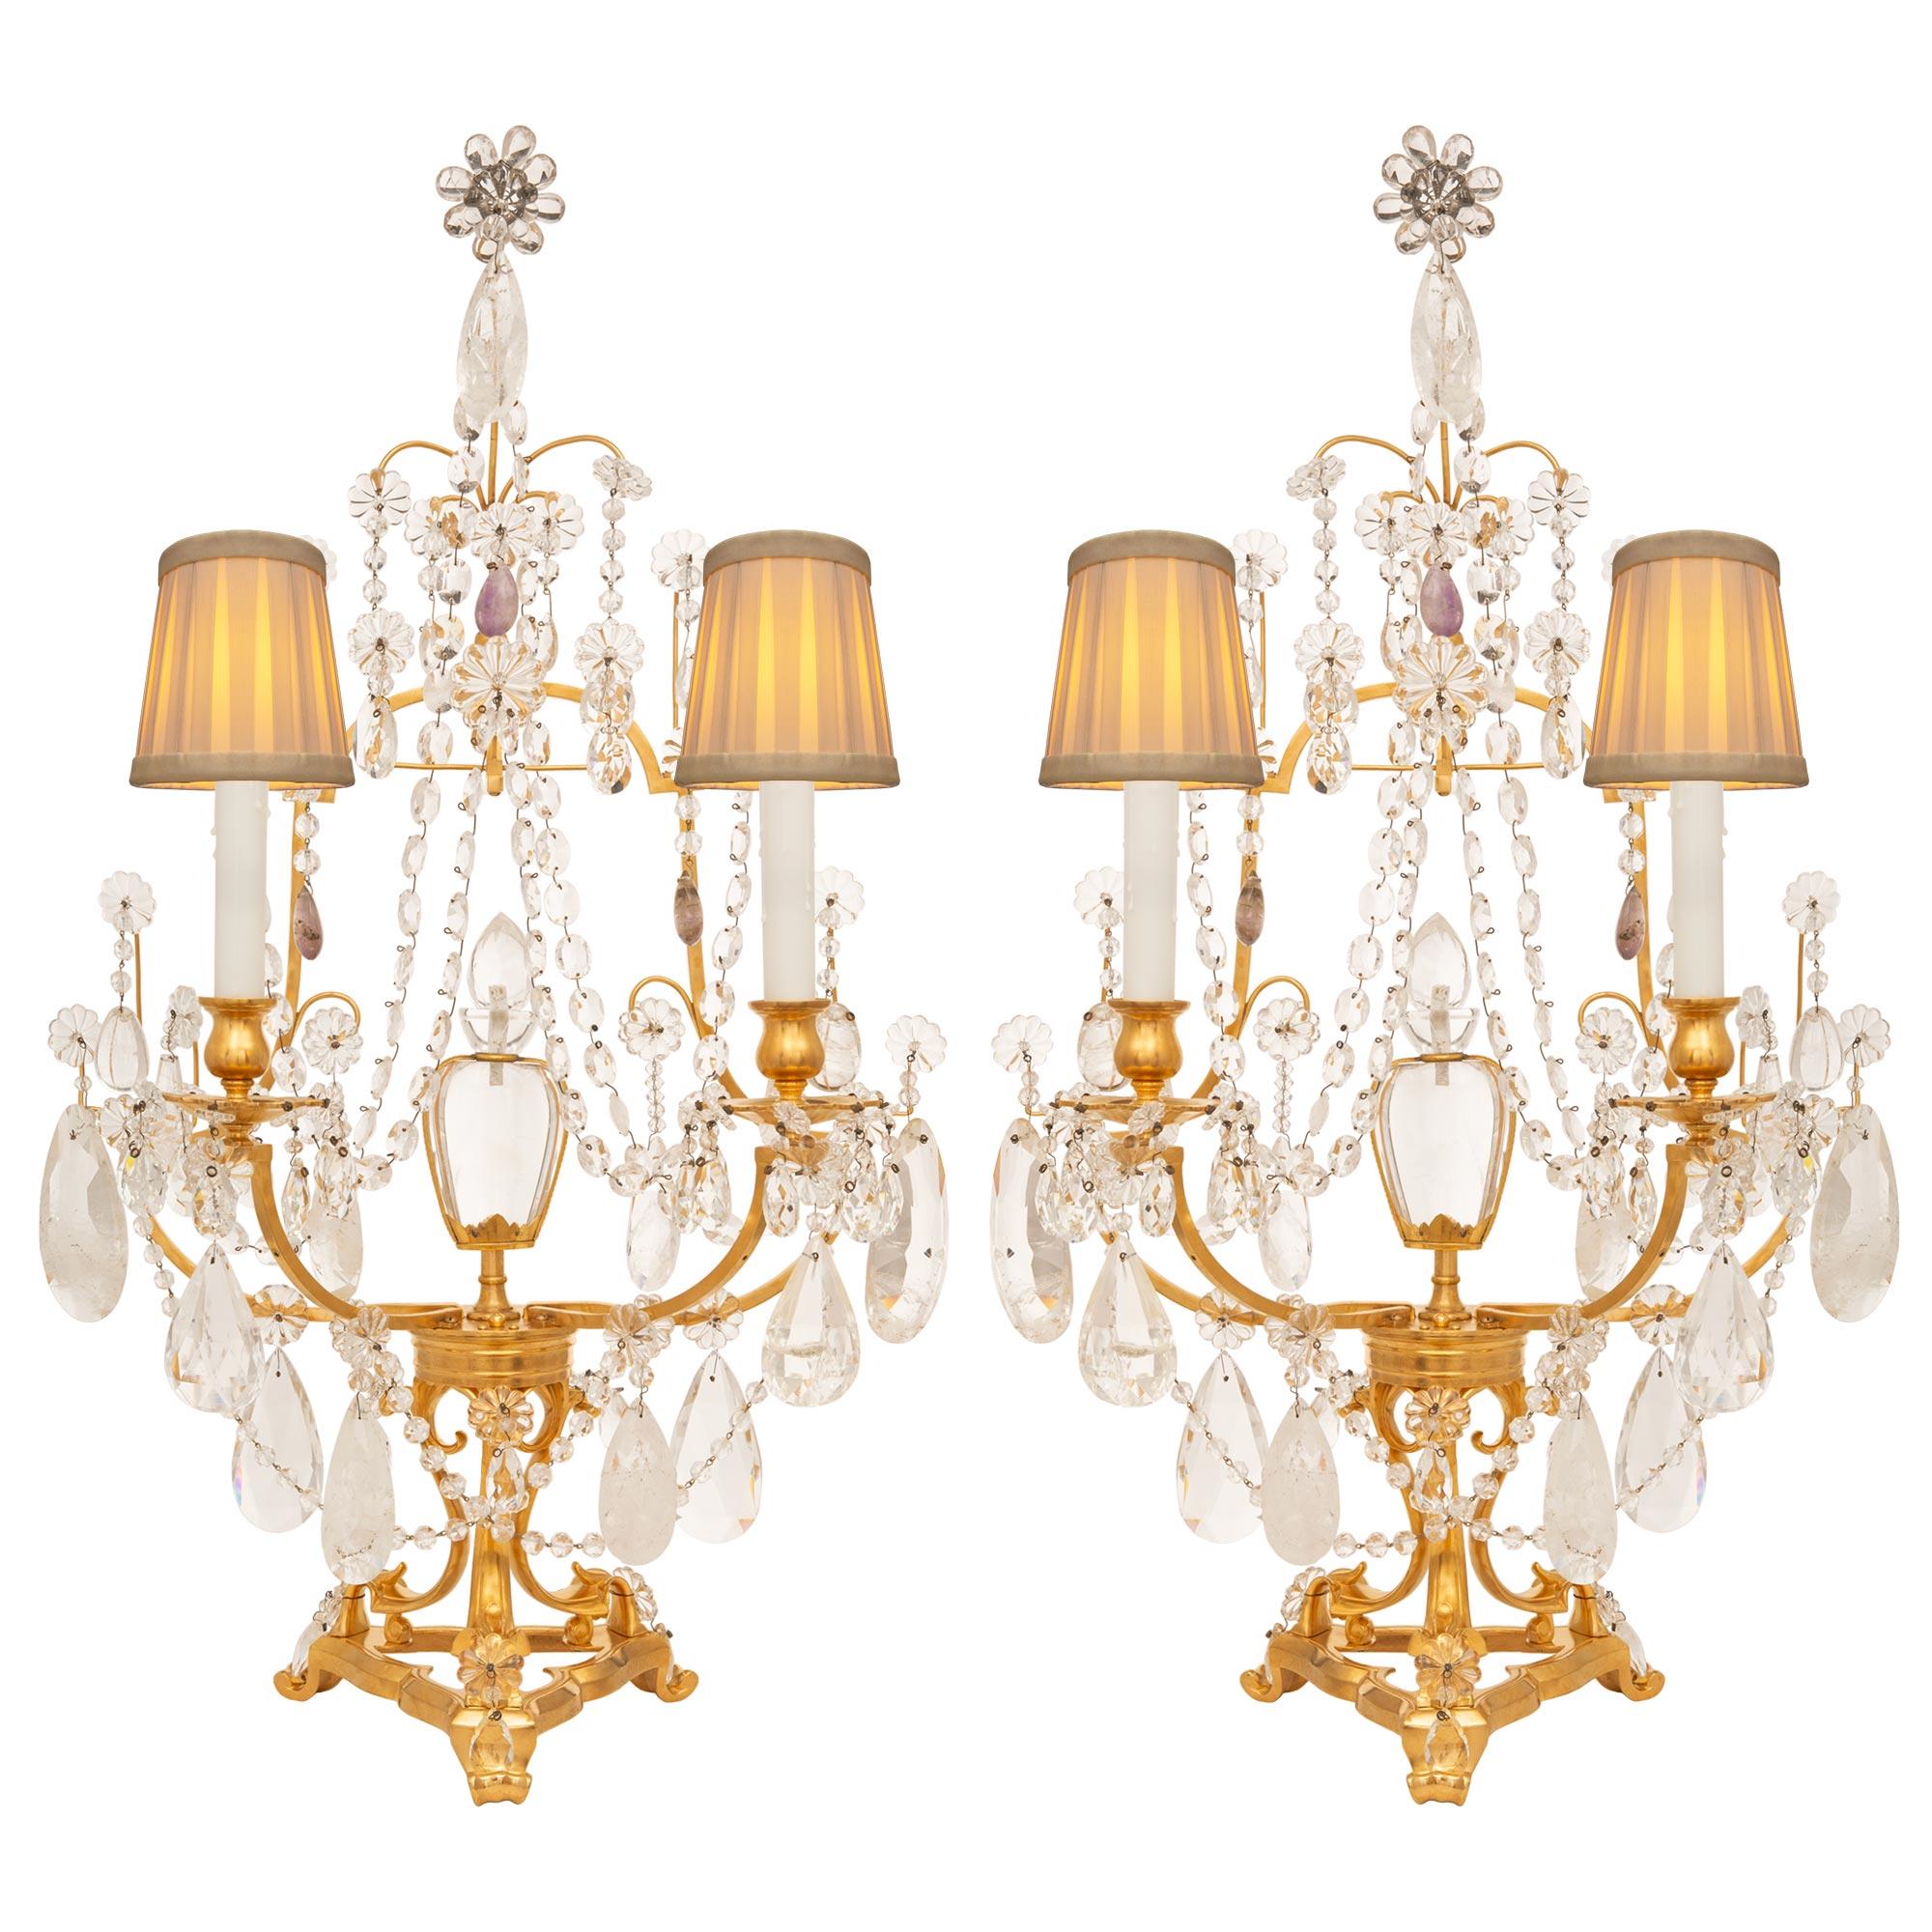 Pair Of French 19th Century Louis XVI St. Rock Crystal & Ormolu Girondoles Lamp For Sale 7